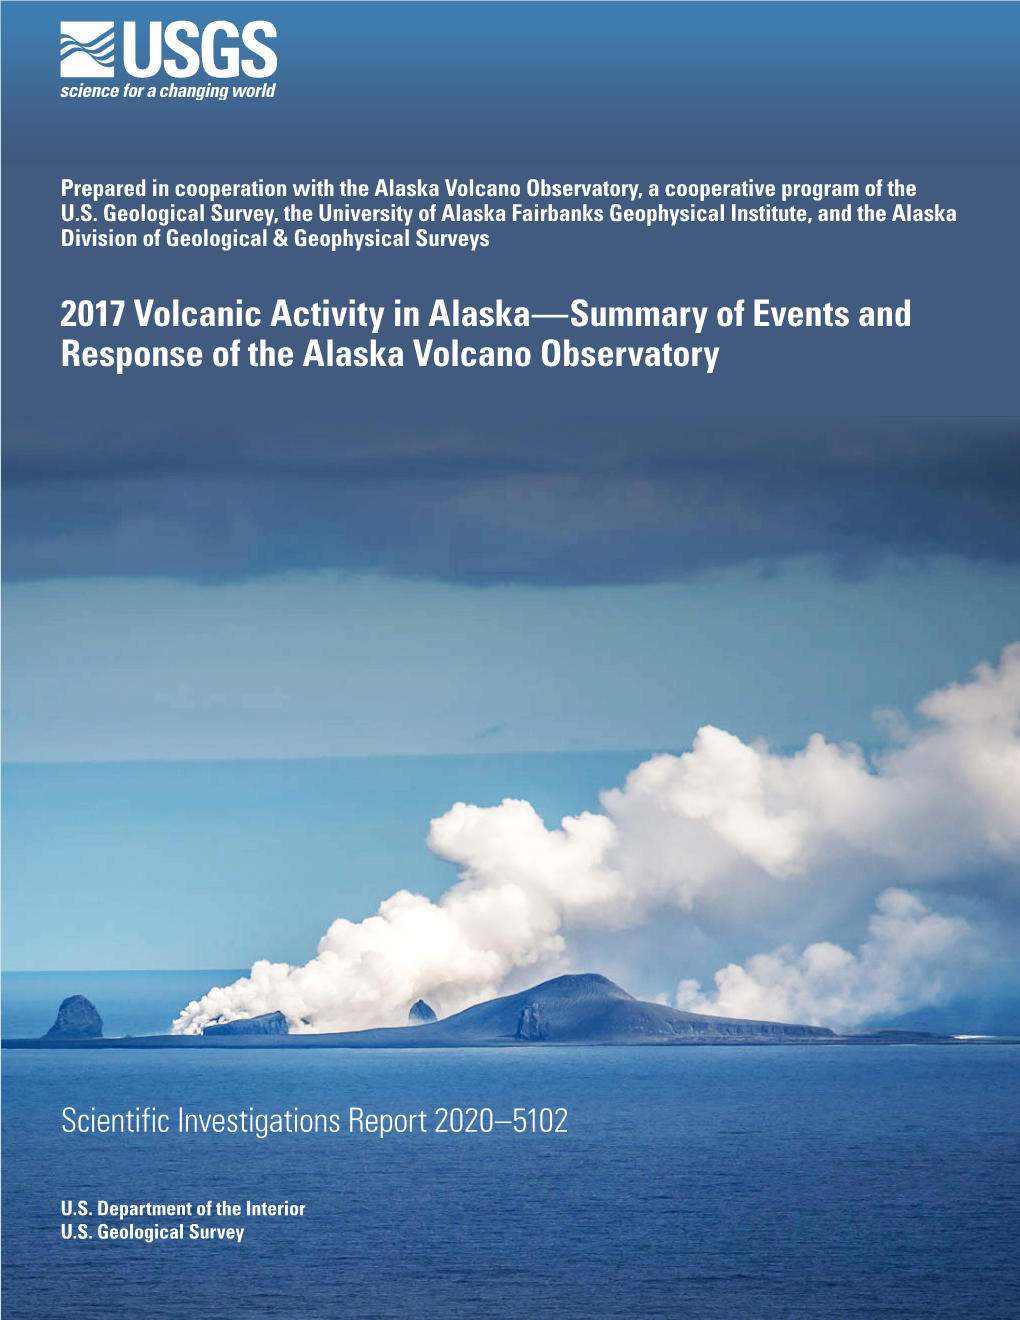 SIR 2020-5102: 2017 Volcanic Activity in Alaska—Summary of Events And